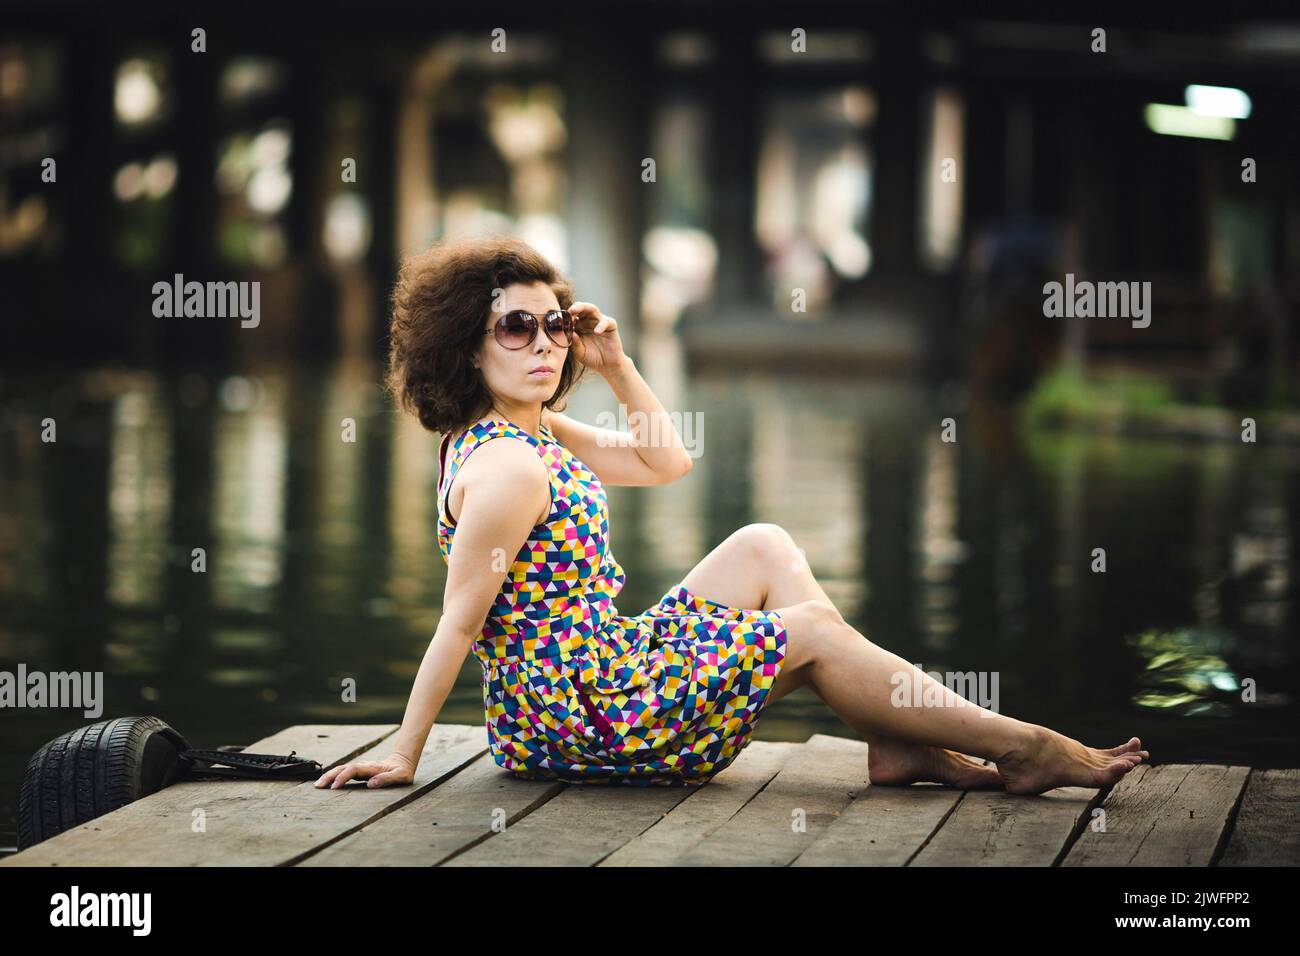 A portrait of an Asian woman sitting on a riverfront. Stock Photo